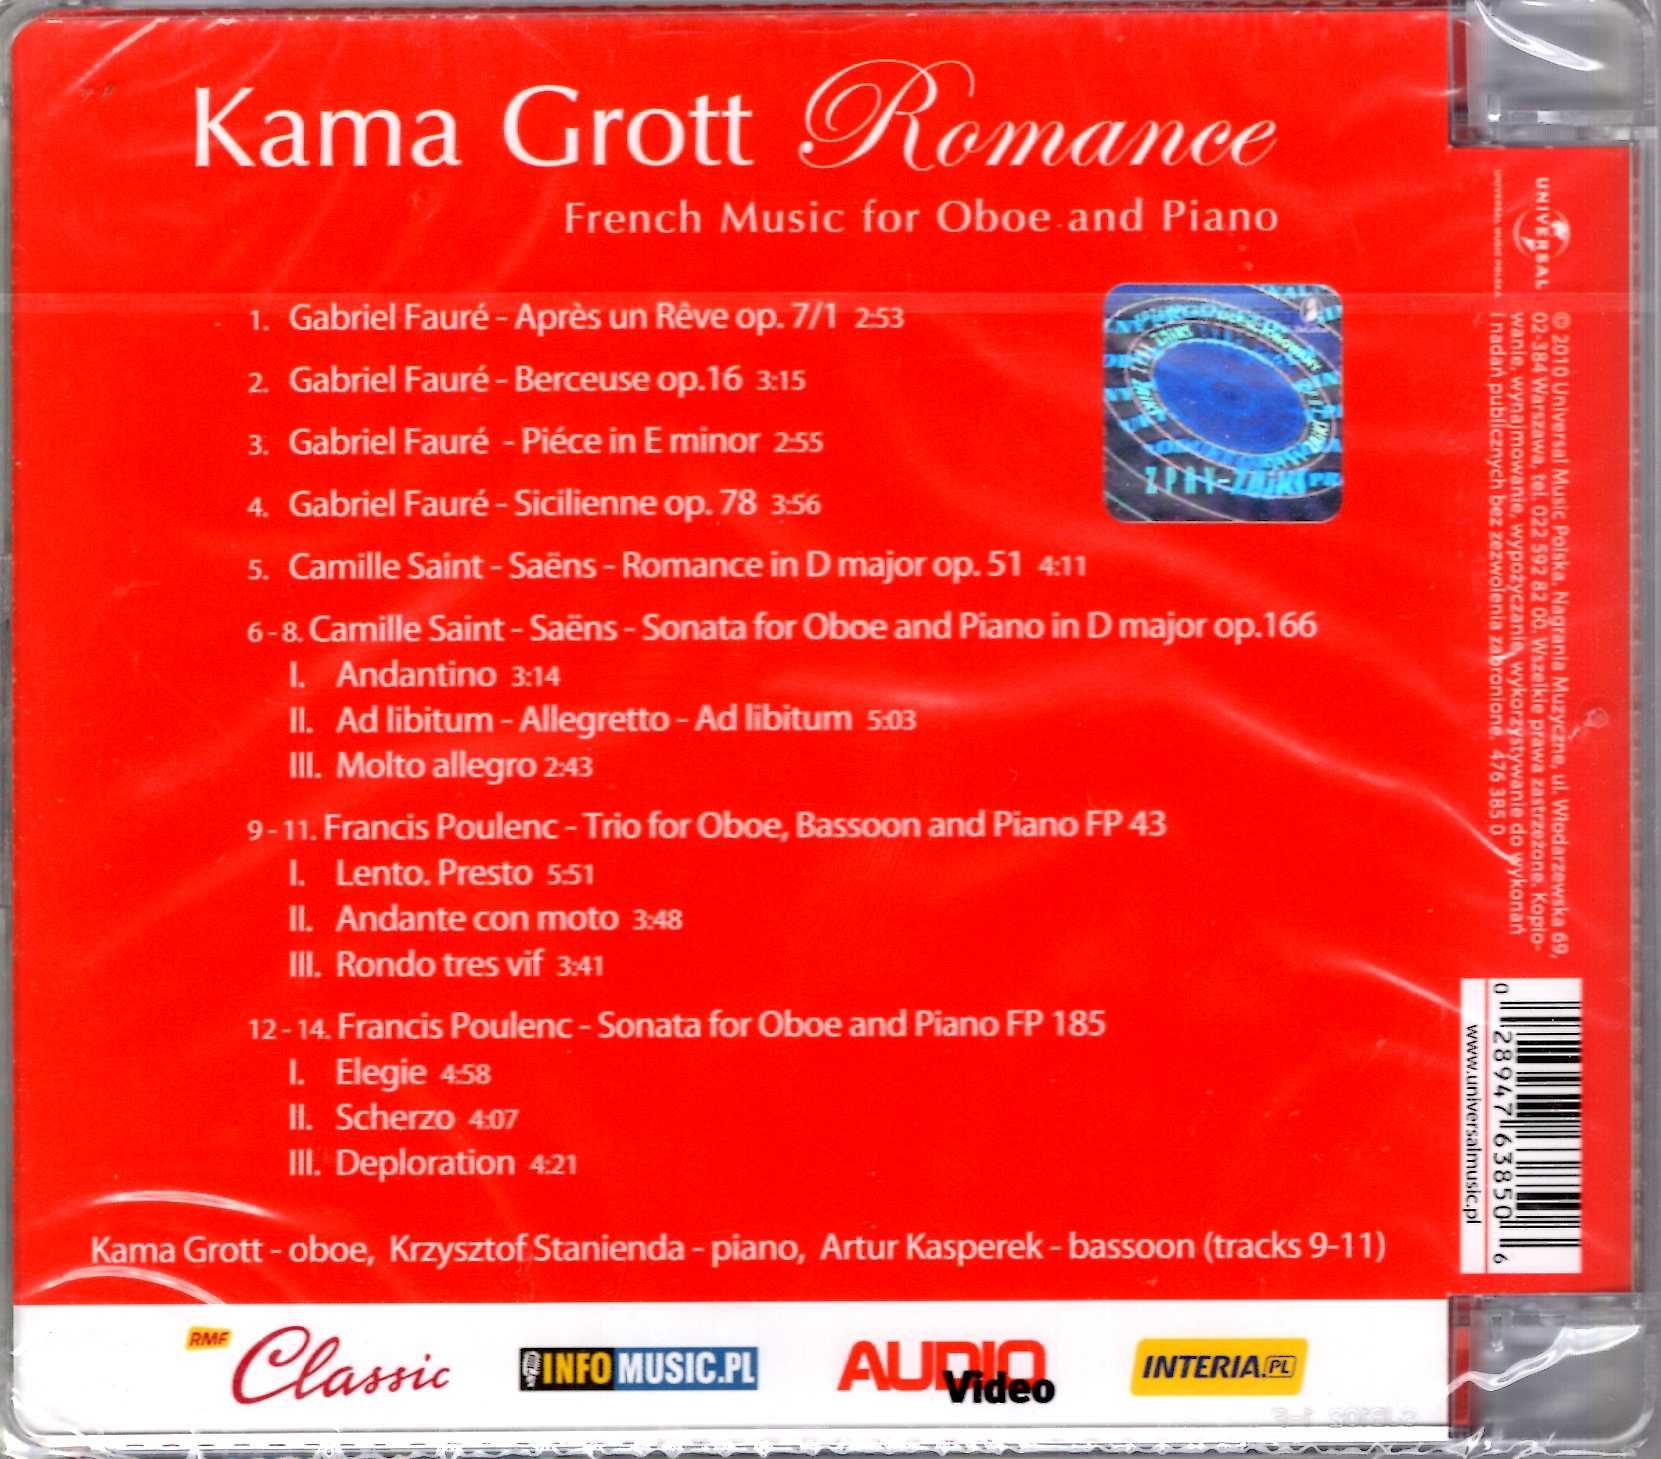 Kama Grott - Romance French Music For Oboe And Piano (CD)